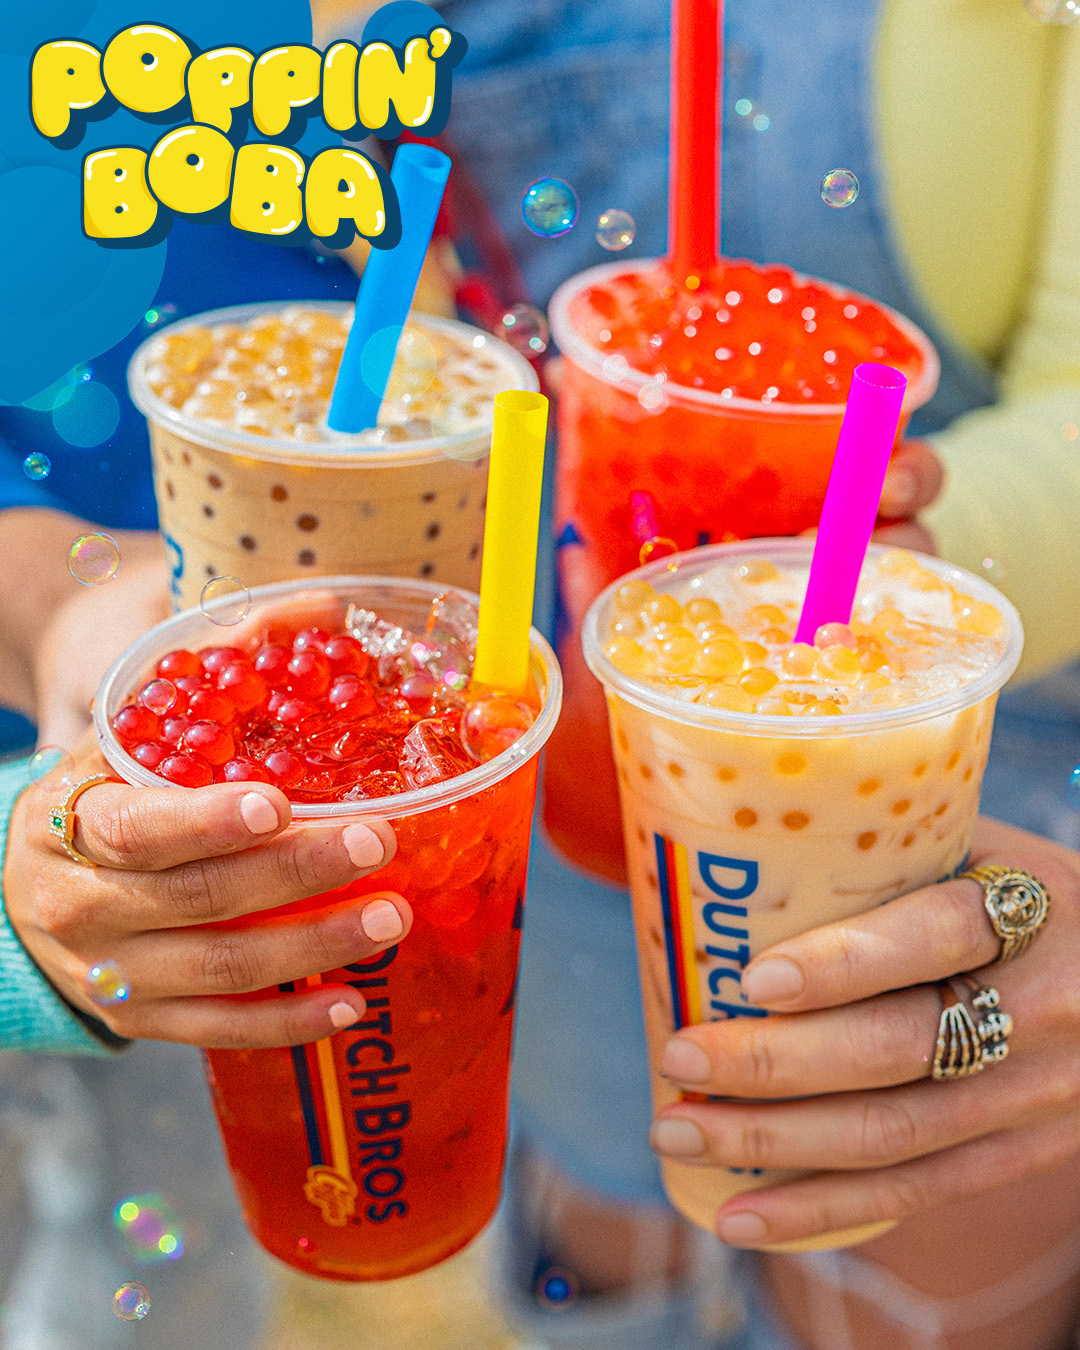 Dutch Bros Adds A Pop of Flavor with new Poppin' Boba